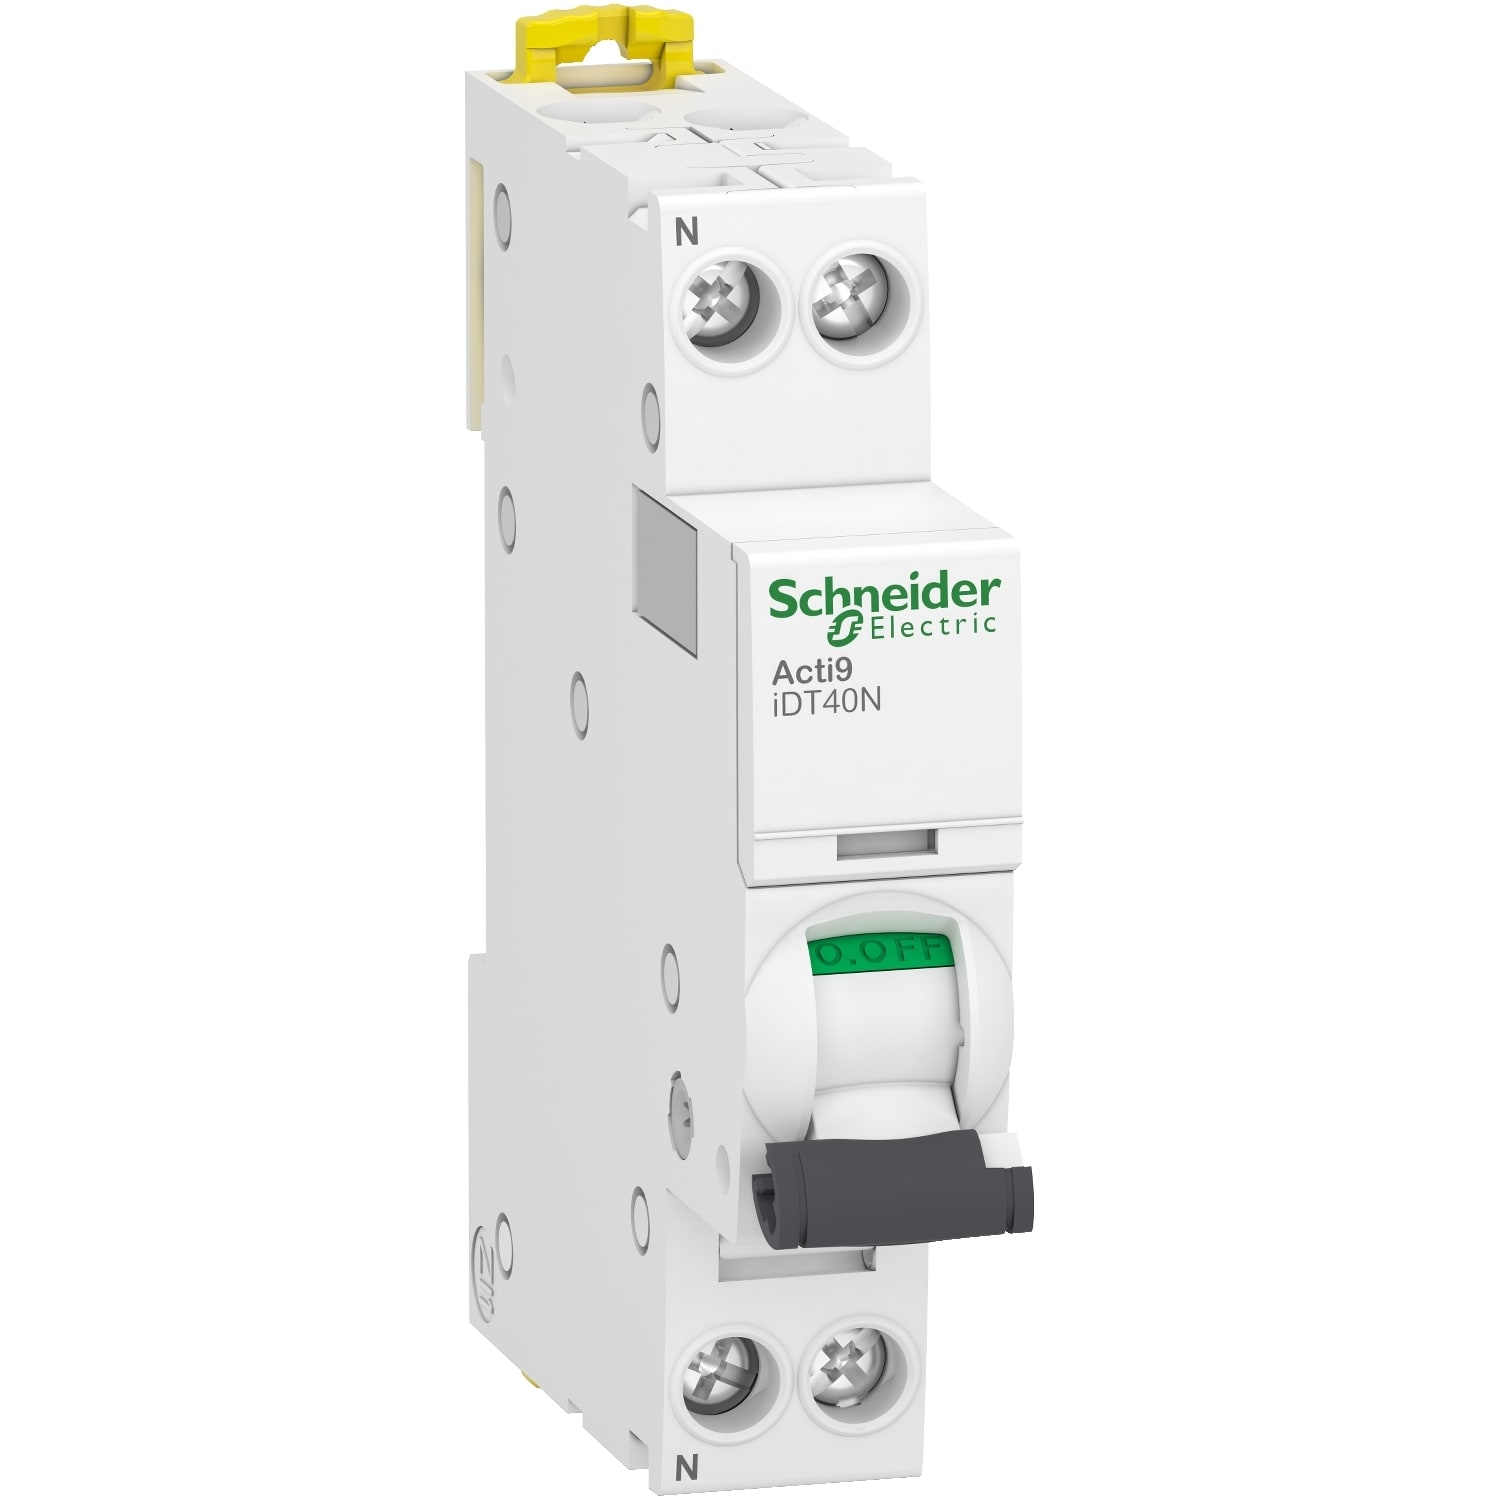 Schneider Electric - Acti9 iDT40N - Disjoncteur modulaire - 1P+N - 25A - Courbe C - 6000A-10kA